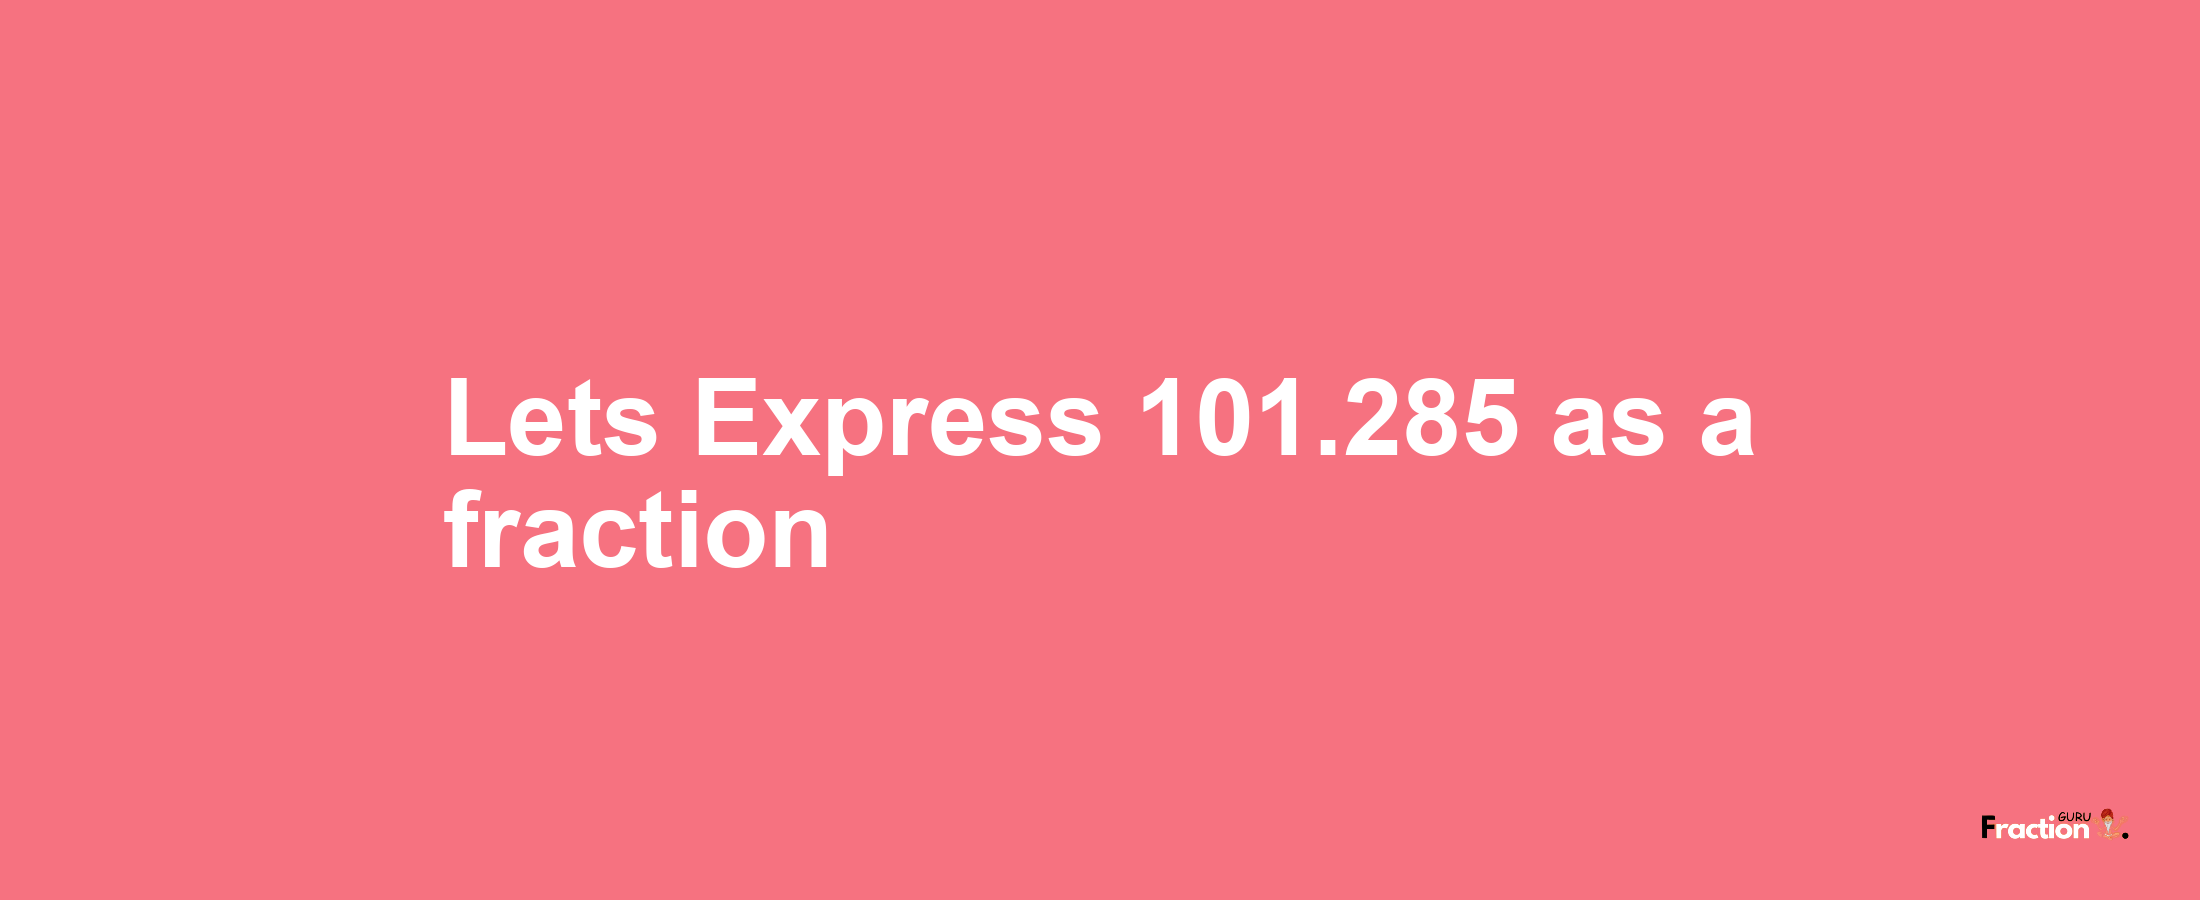 Lets Express 101.285 as afraction